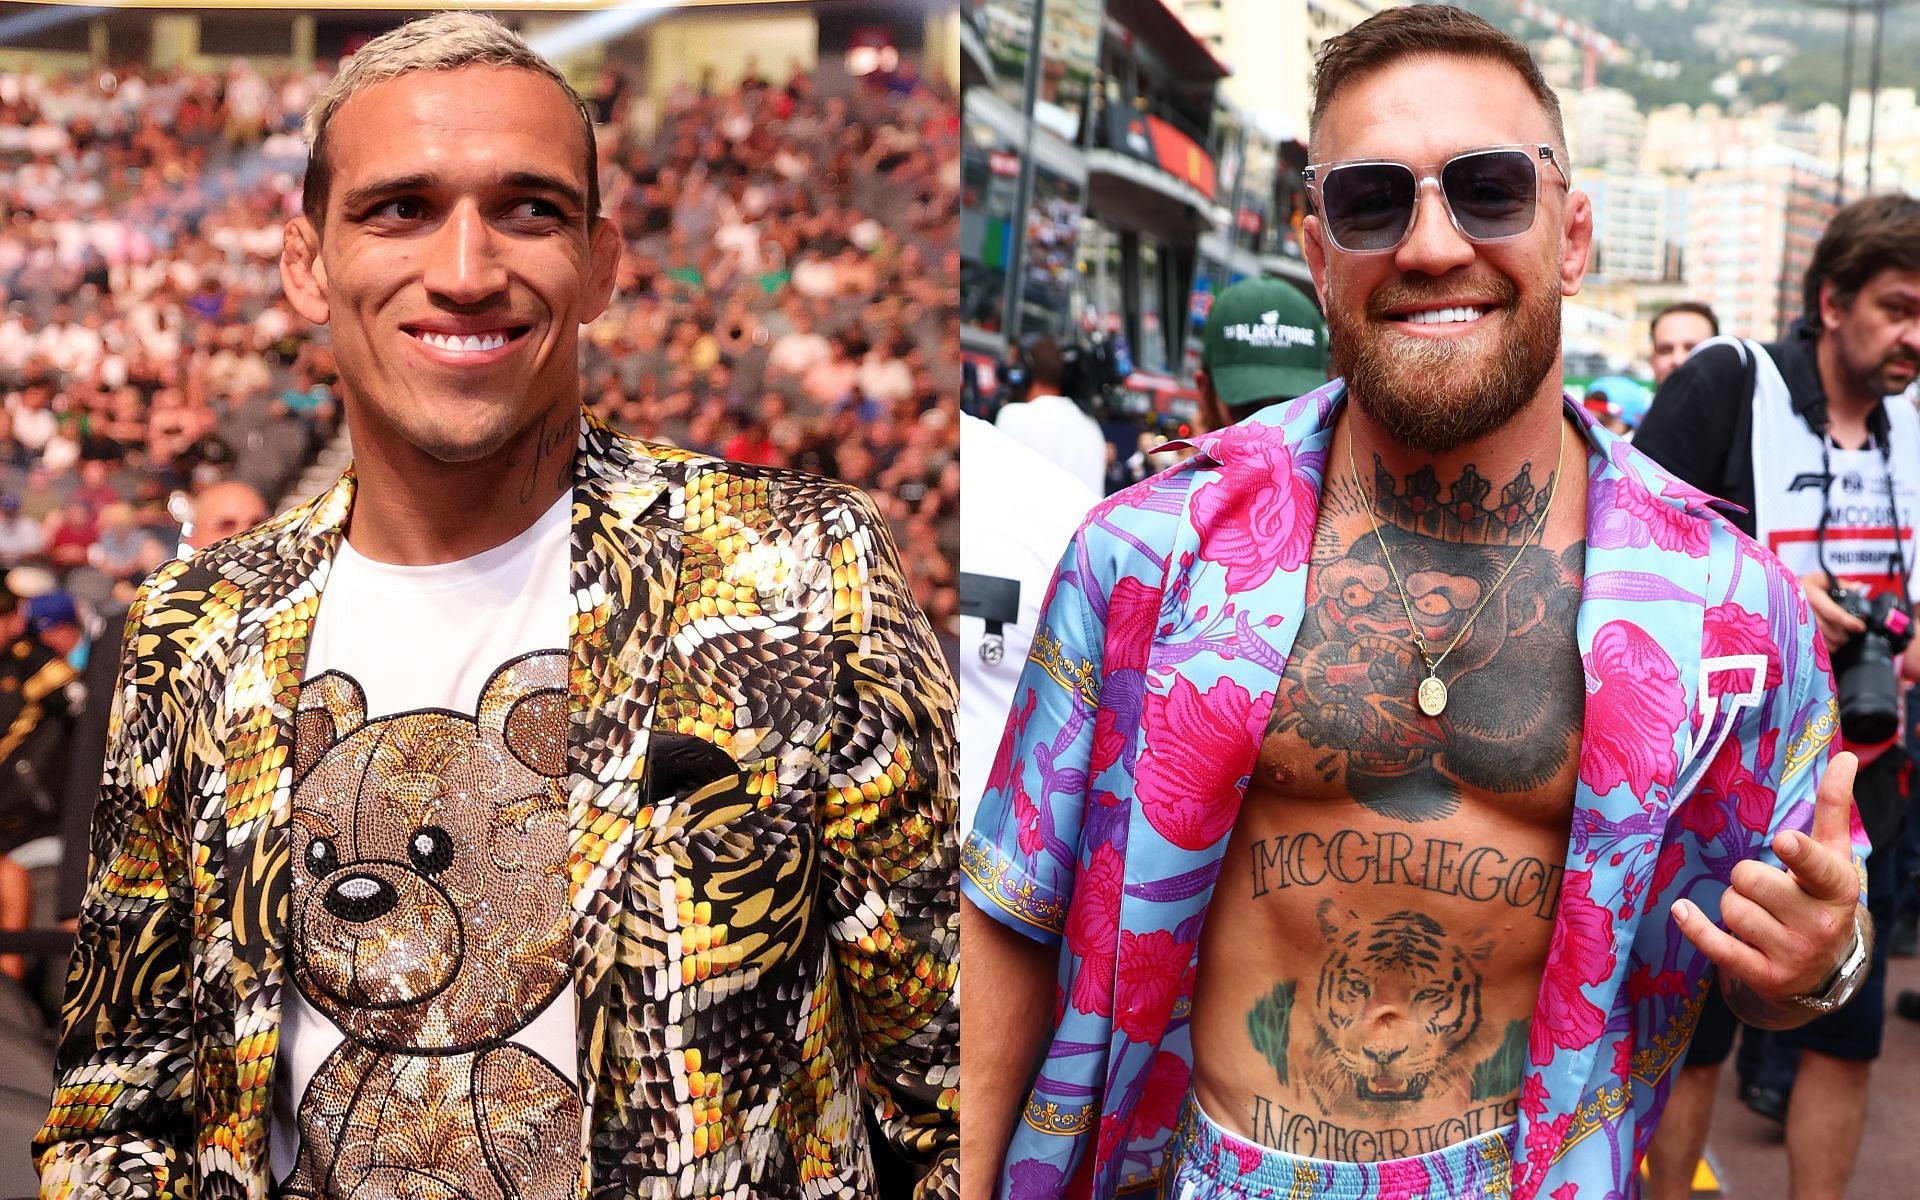 Charles Oliveira (left) and Conor McGregor (right) (Images via Getty)